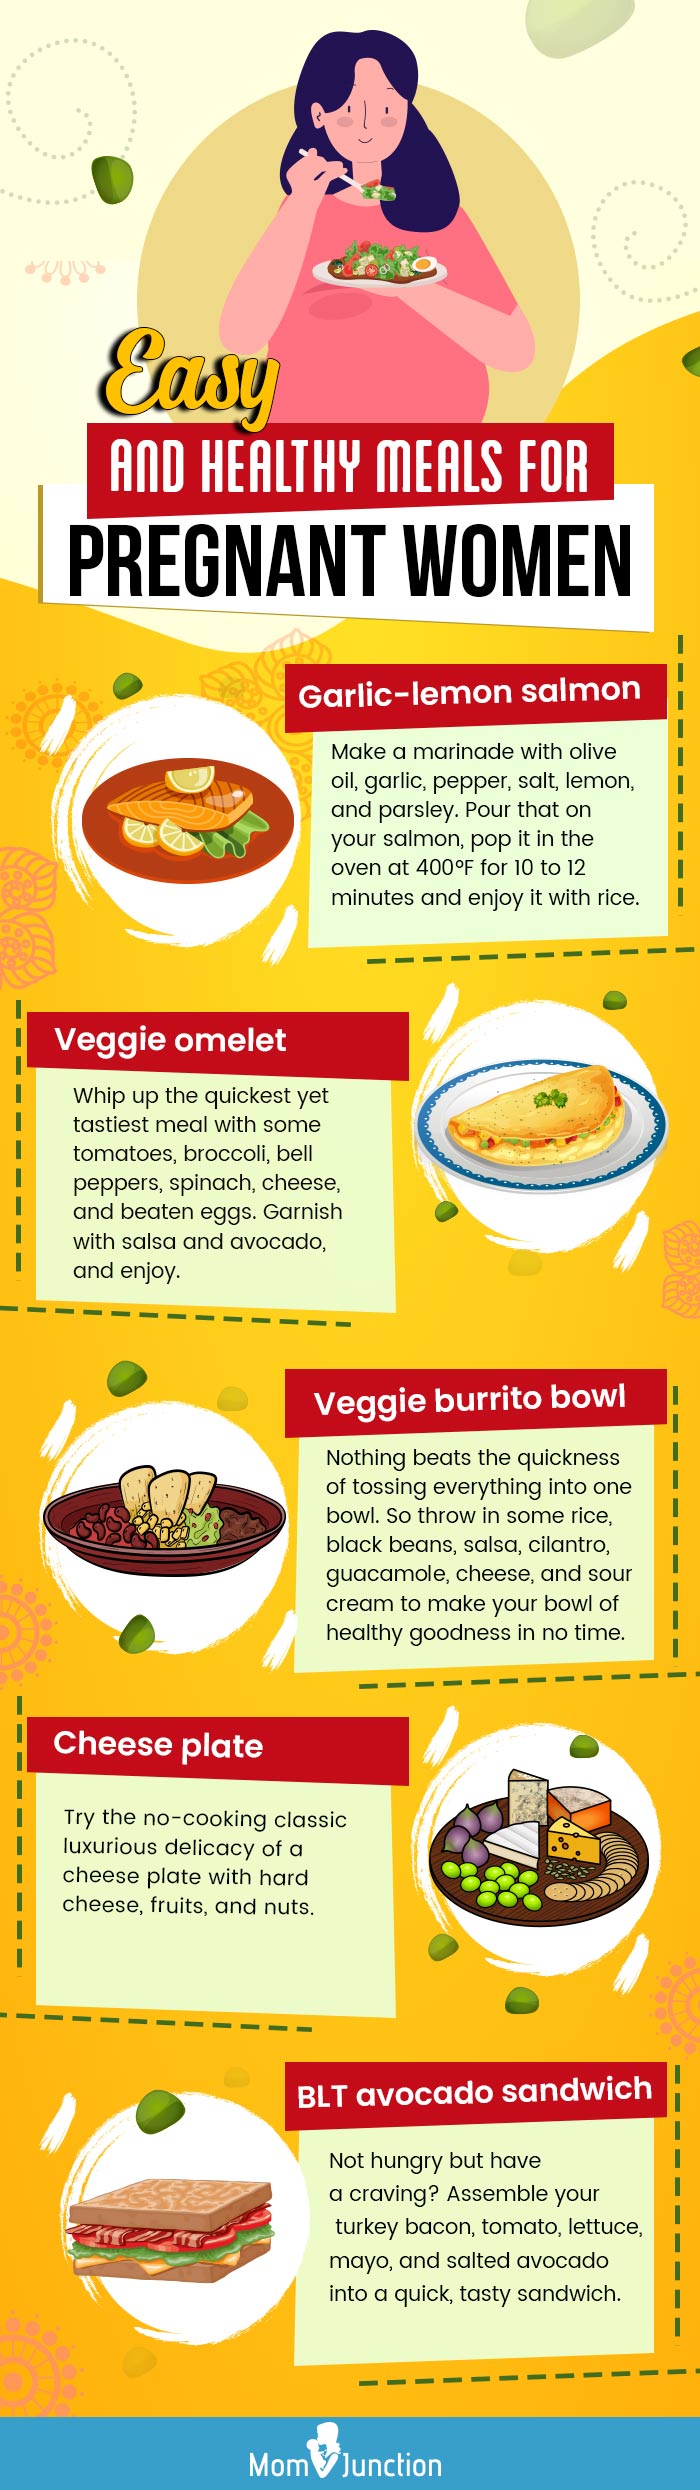 easy and healthy meals for pregnant women (infographic)